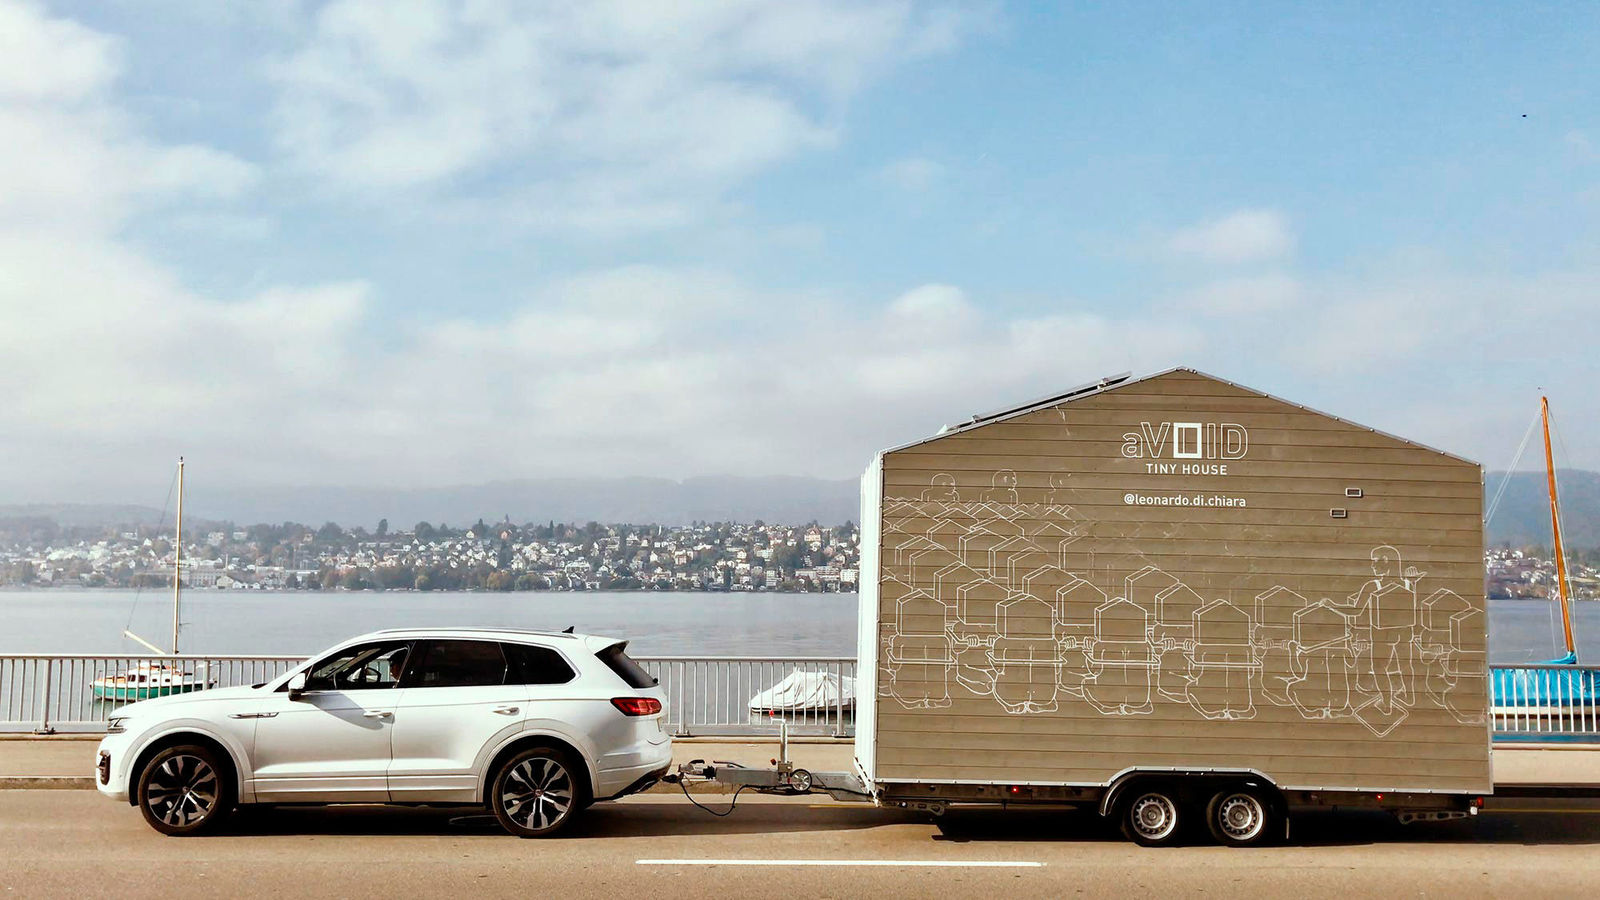 Story "When the Touareg Tows a House"